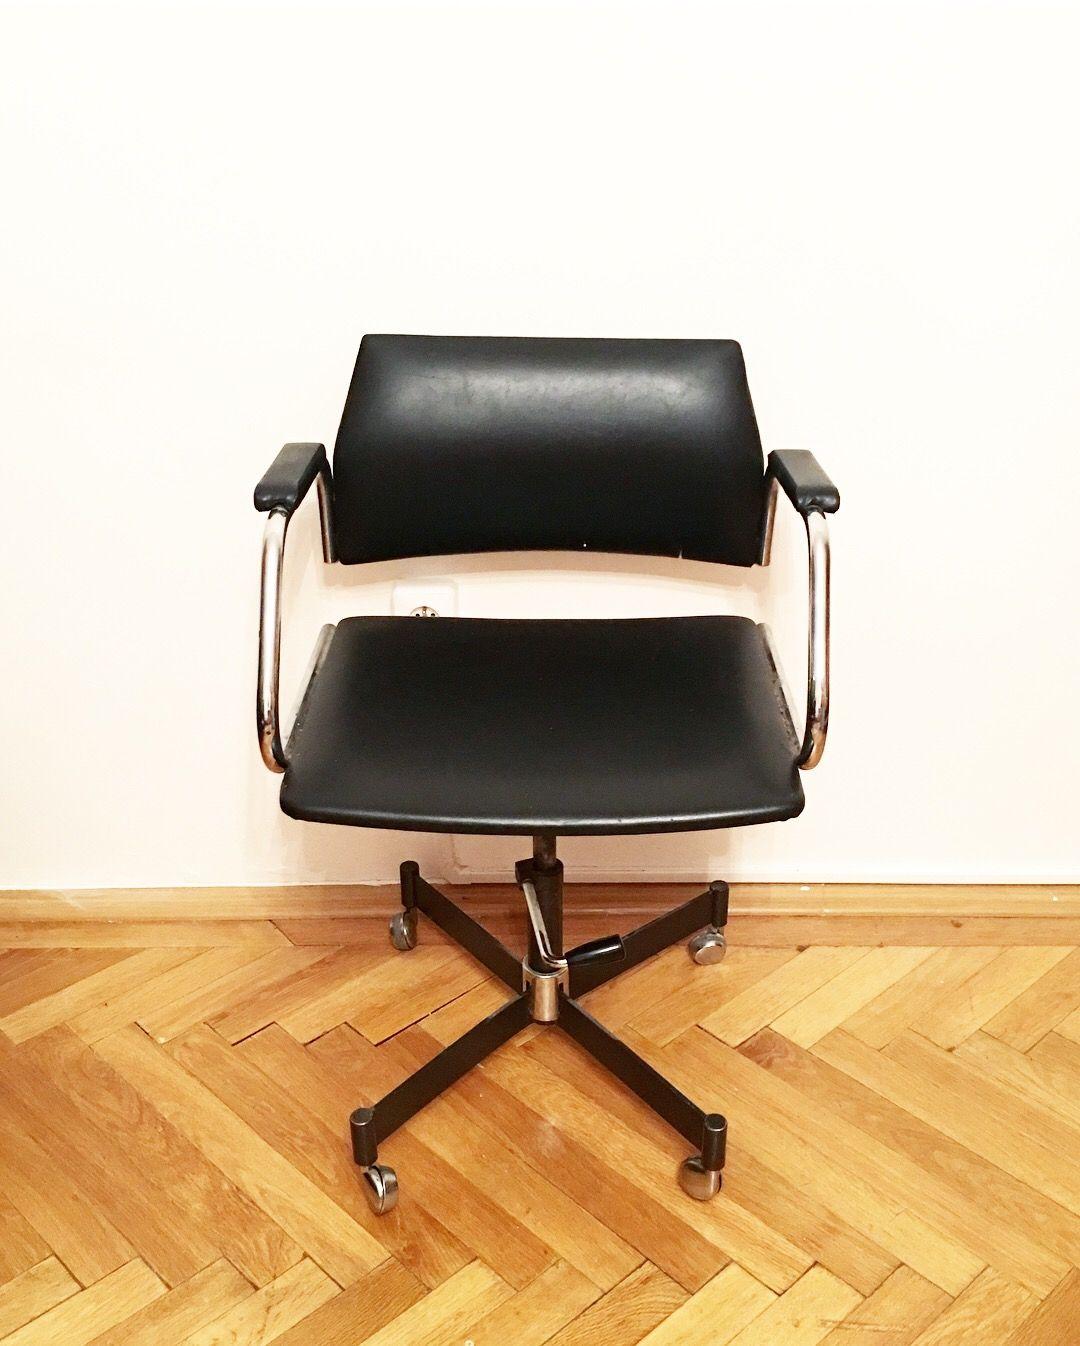 This vintage adjustable office chair was made by Kovona Czechoslovakia in the 1970s.